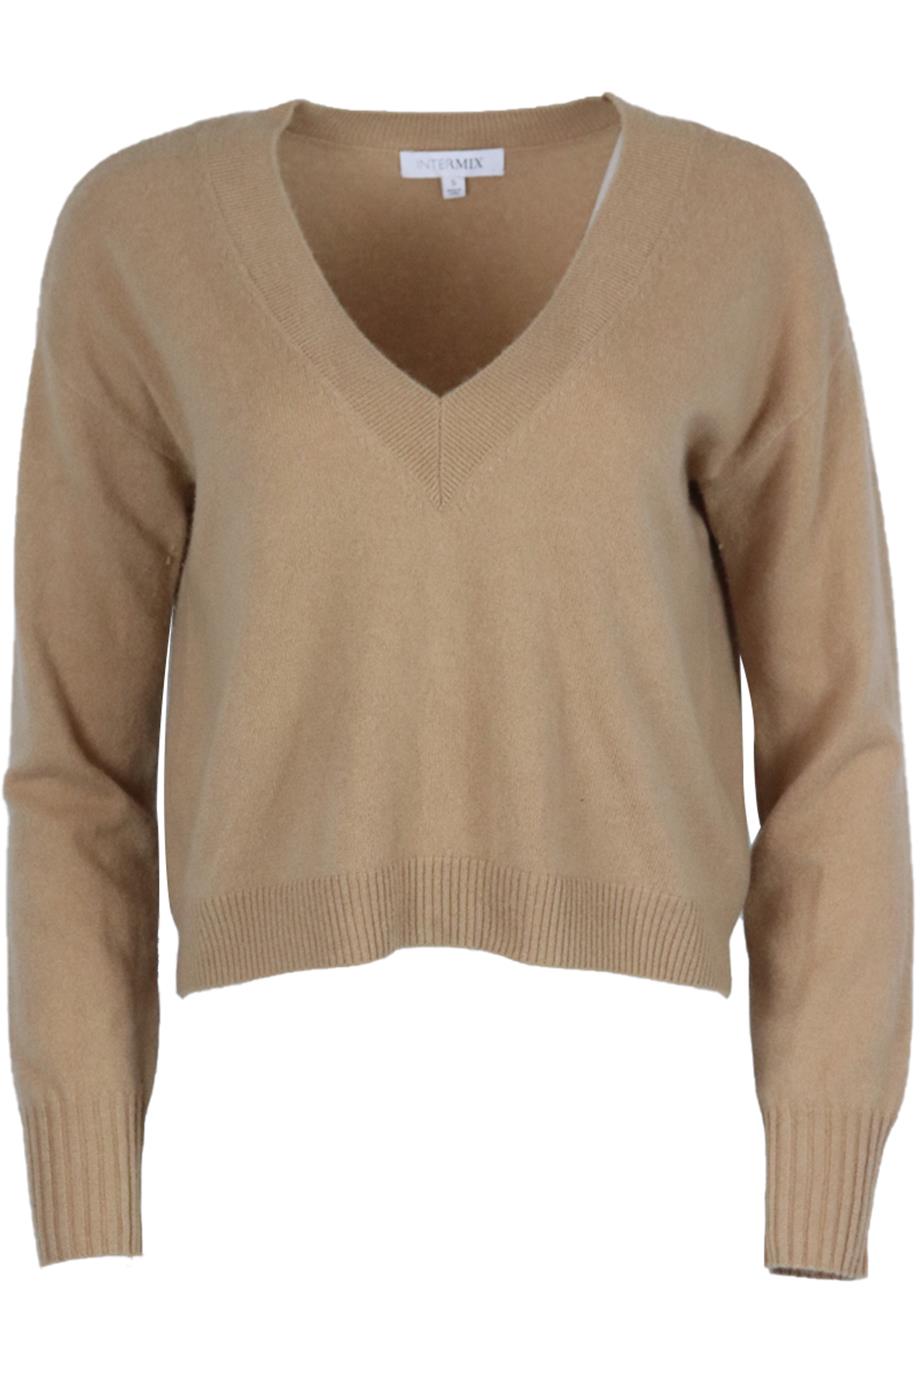 INTERMIX CROPPED CASHMERE SWEATER SMALL